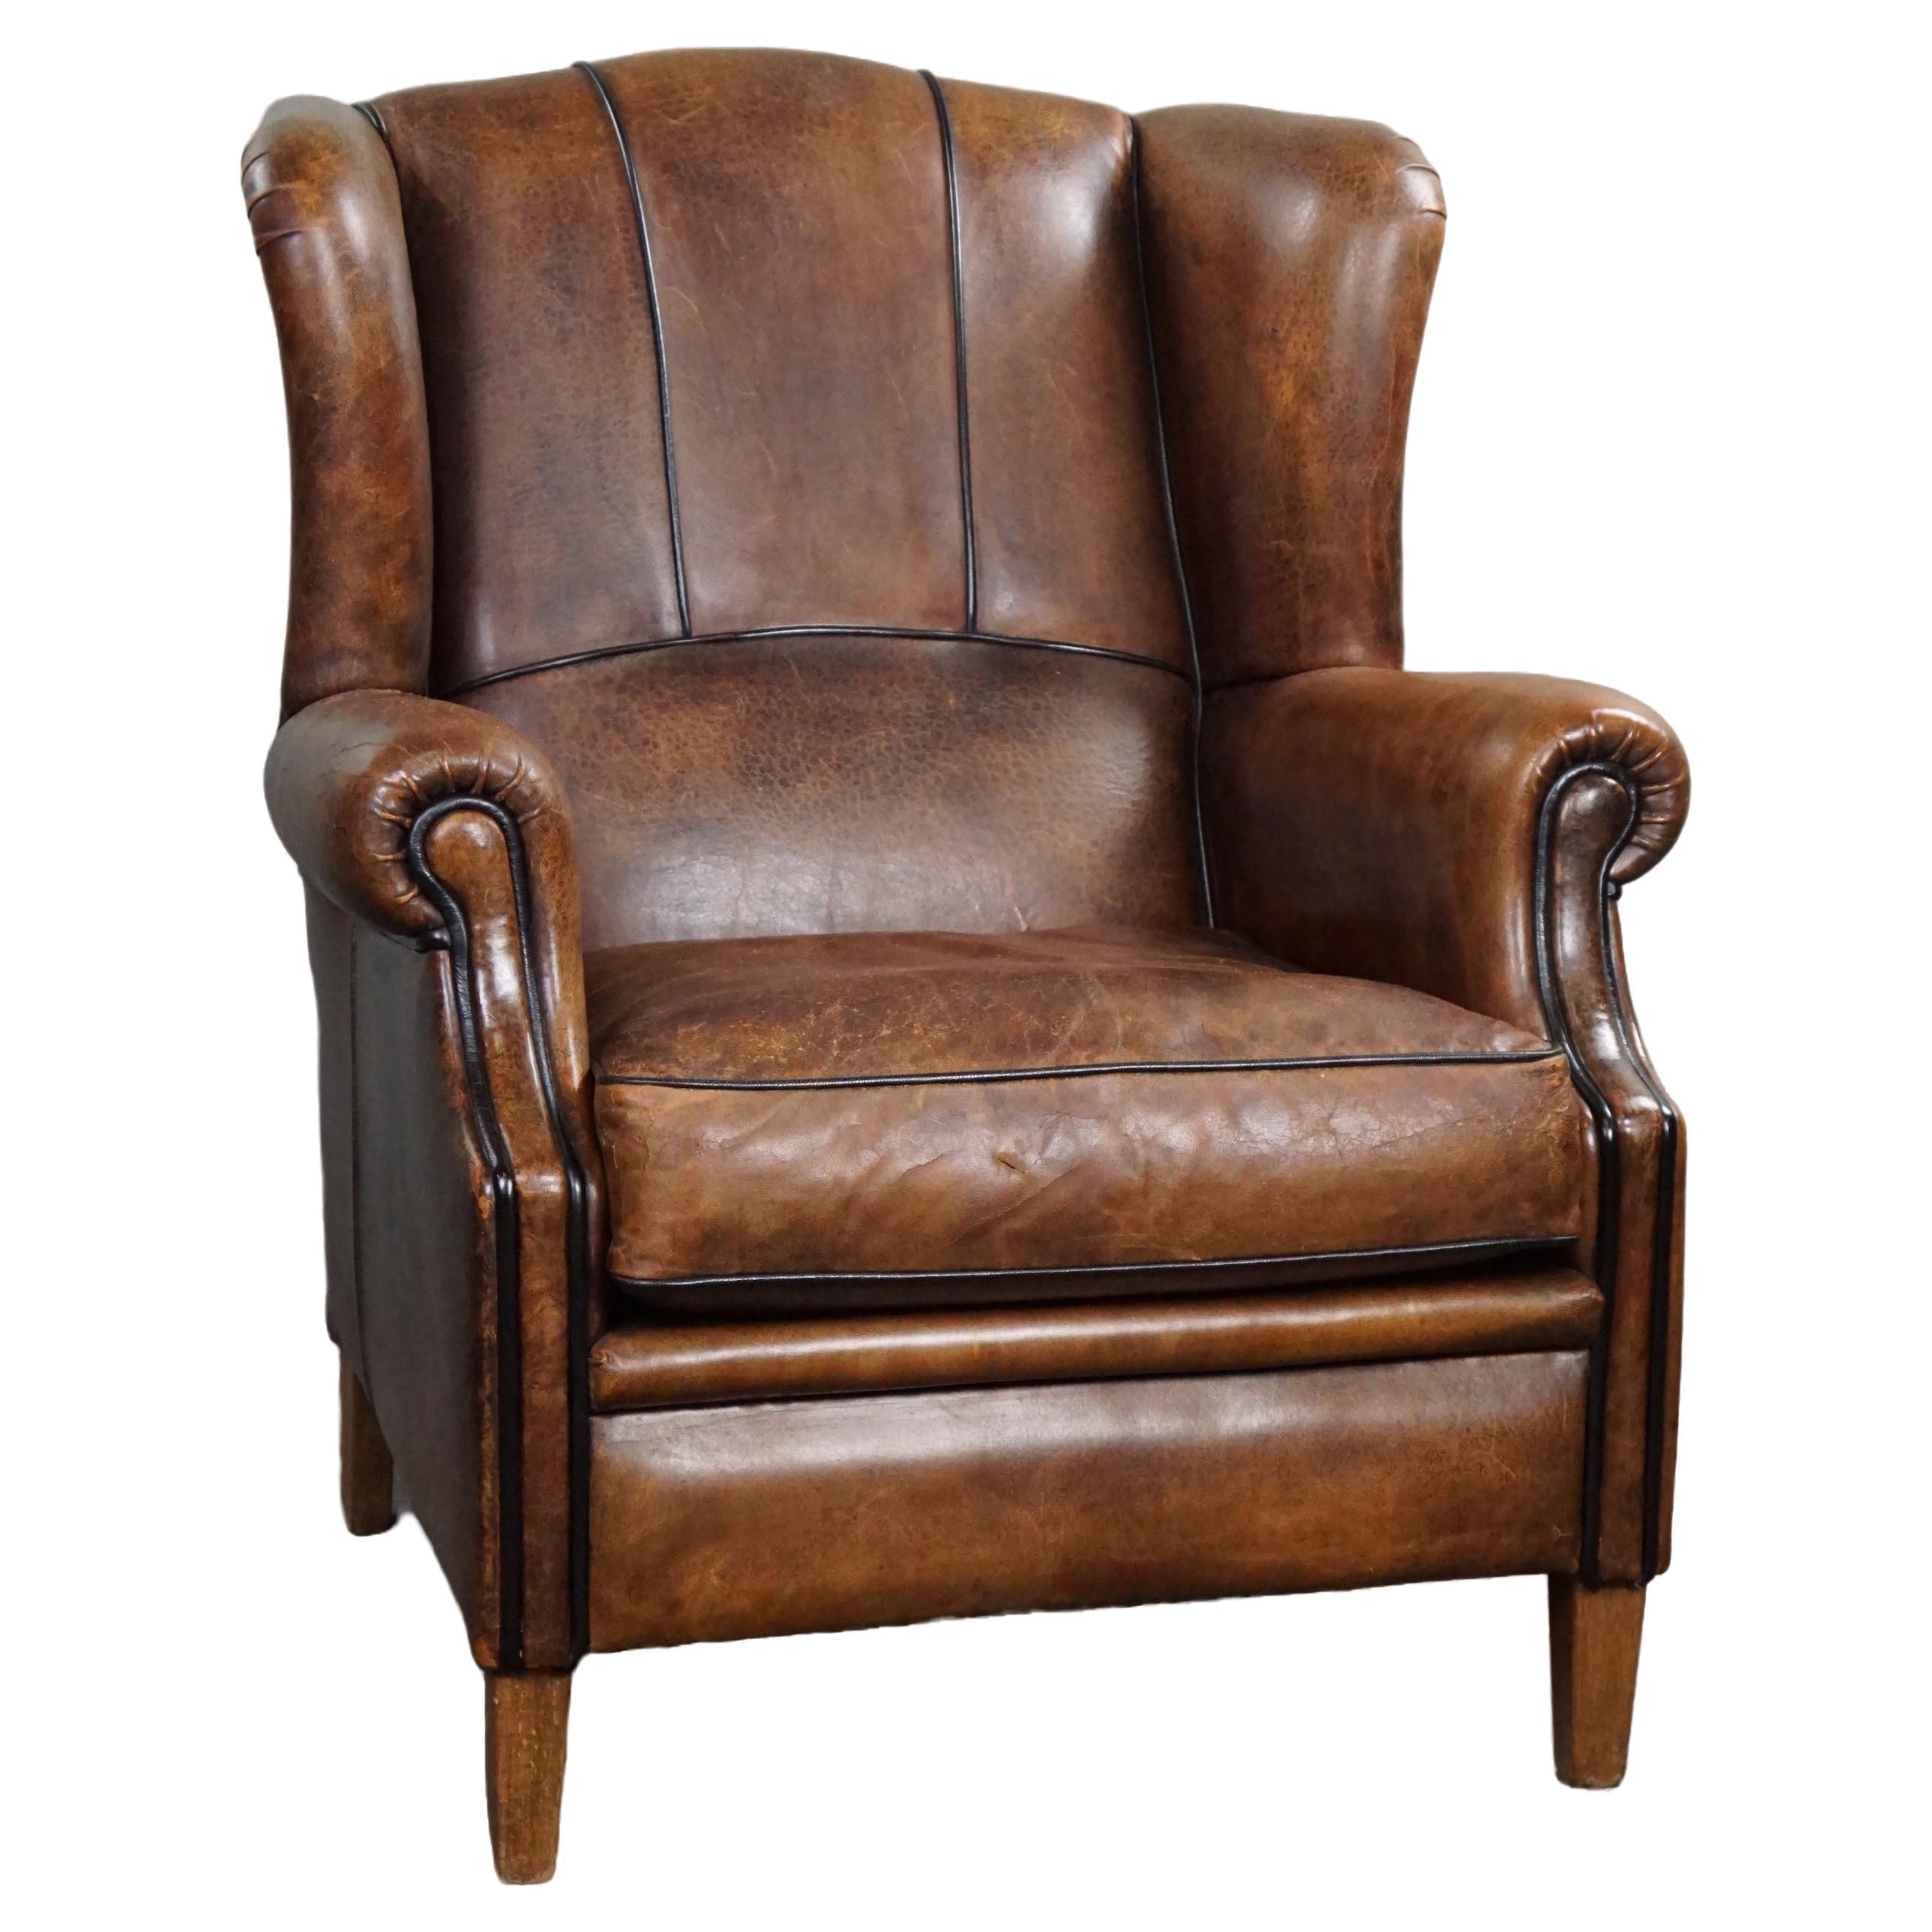 Strikingly colored sheepskin leather wing chair